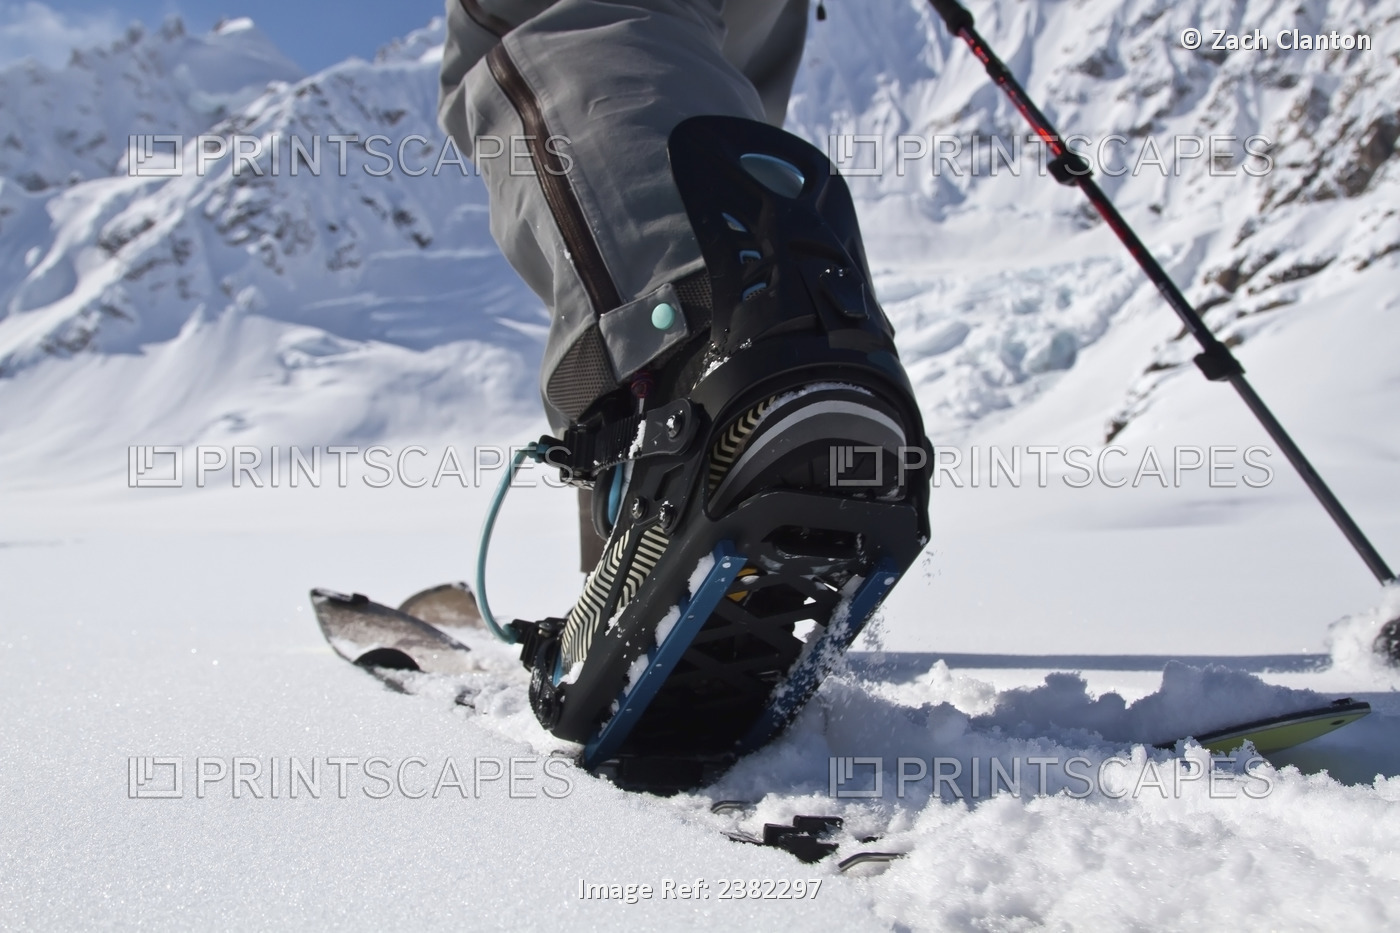 Backcountry Skier Skinning In The Tordrillo Mountains With A Splitboard ...